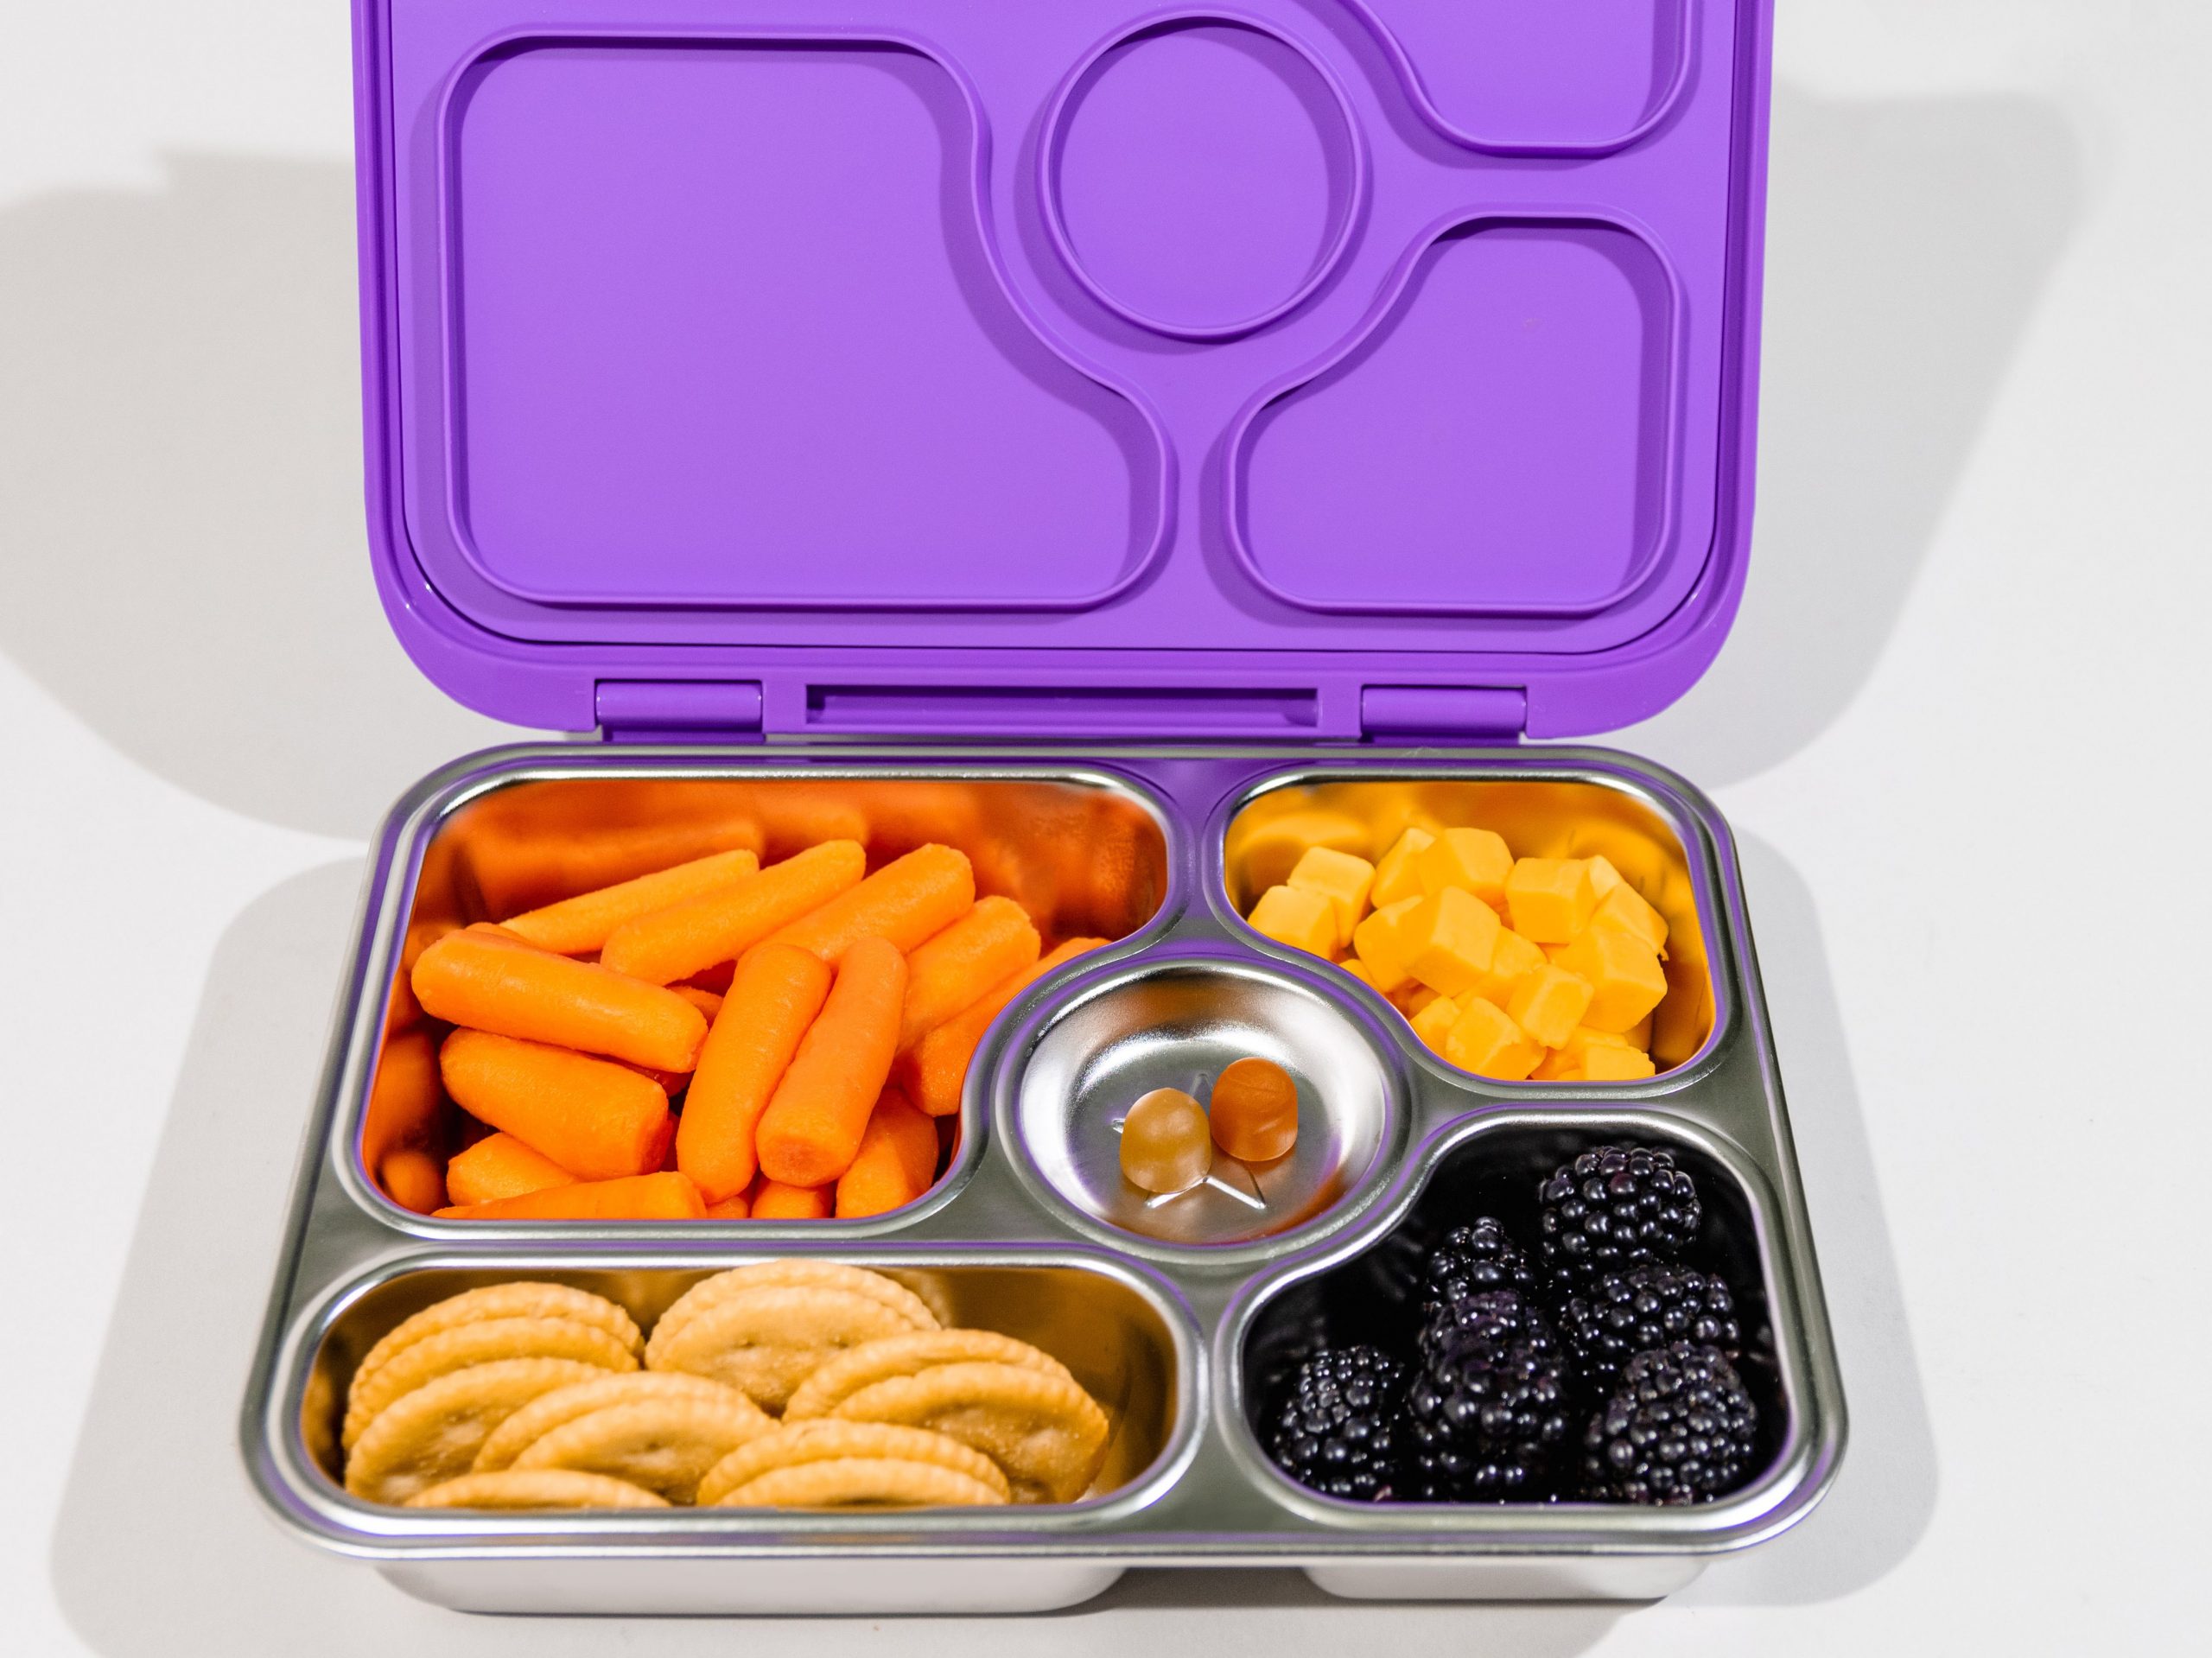 Wholesome Lunch Box Snacks for the Whole Family